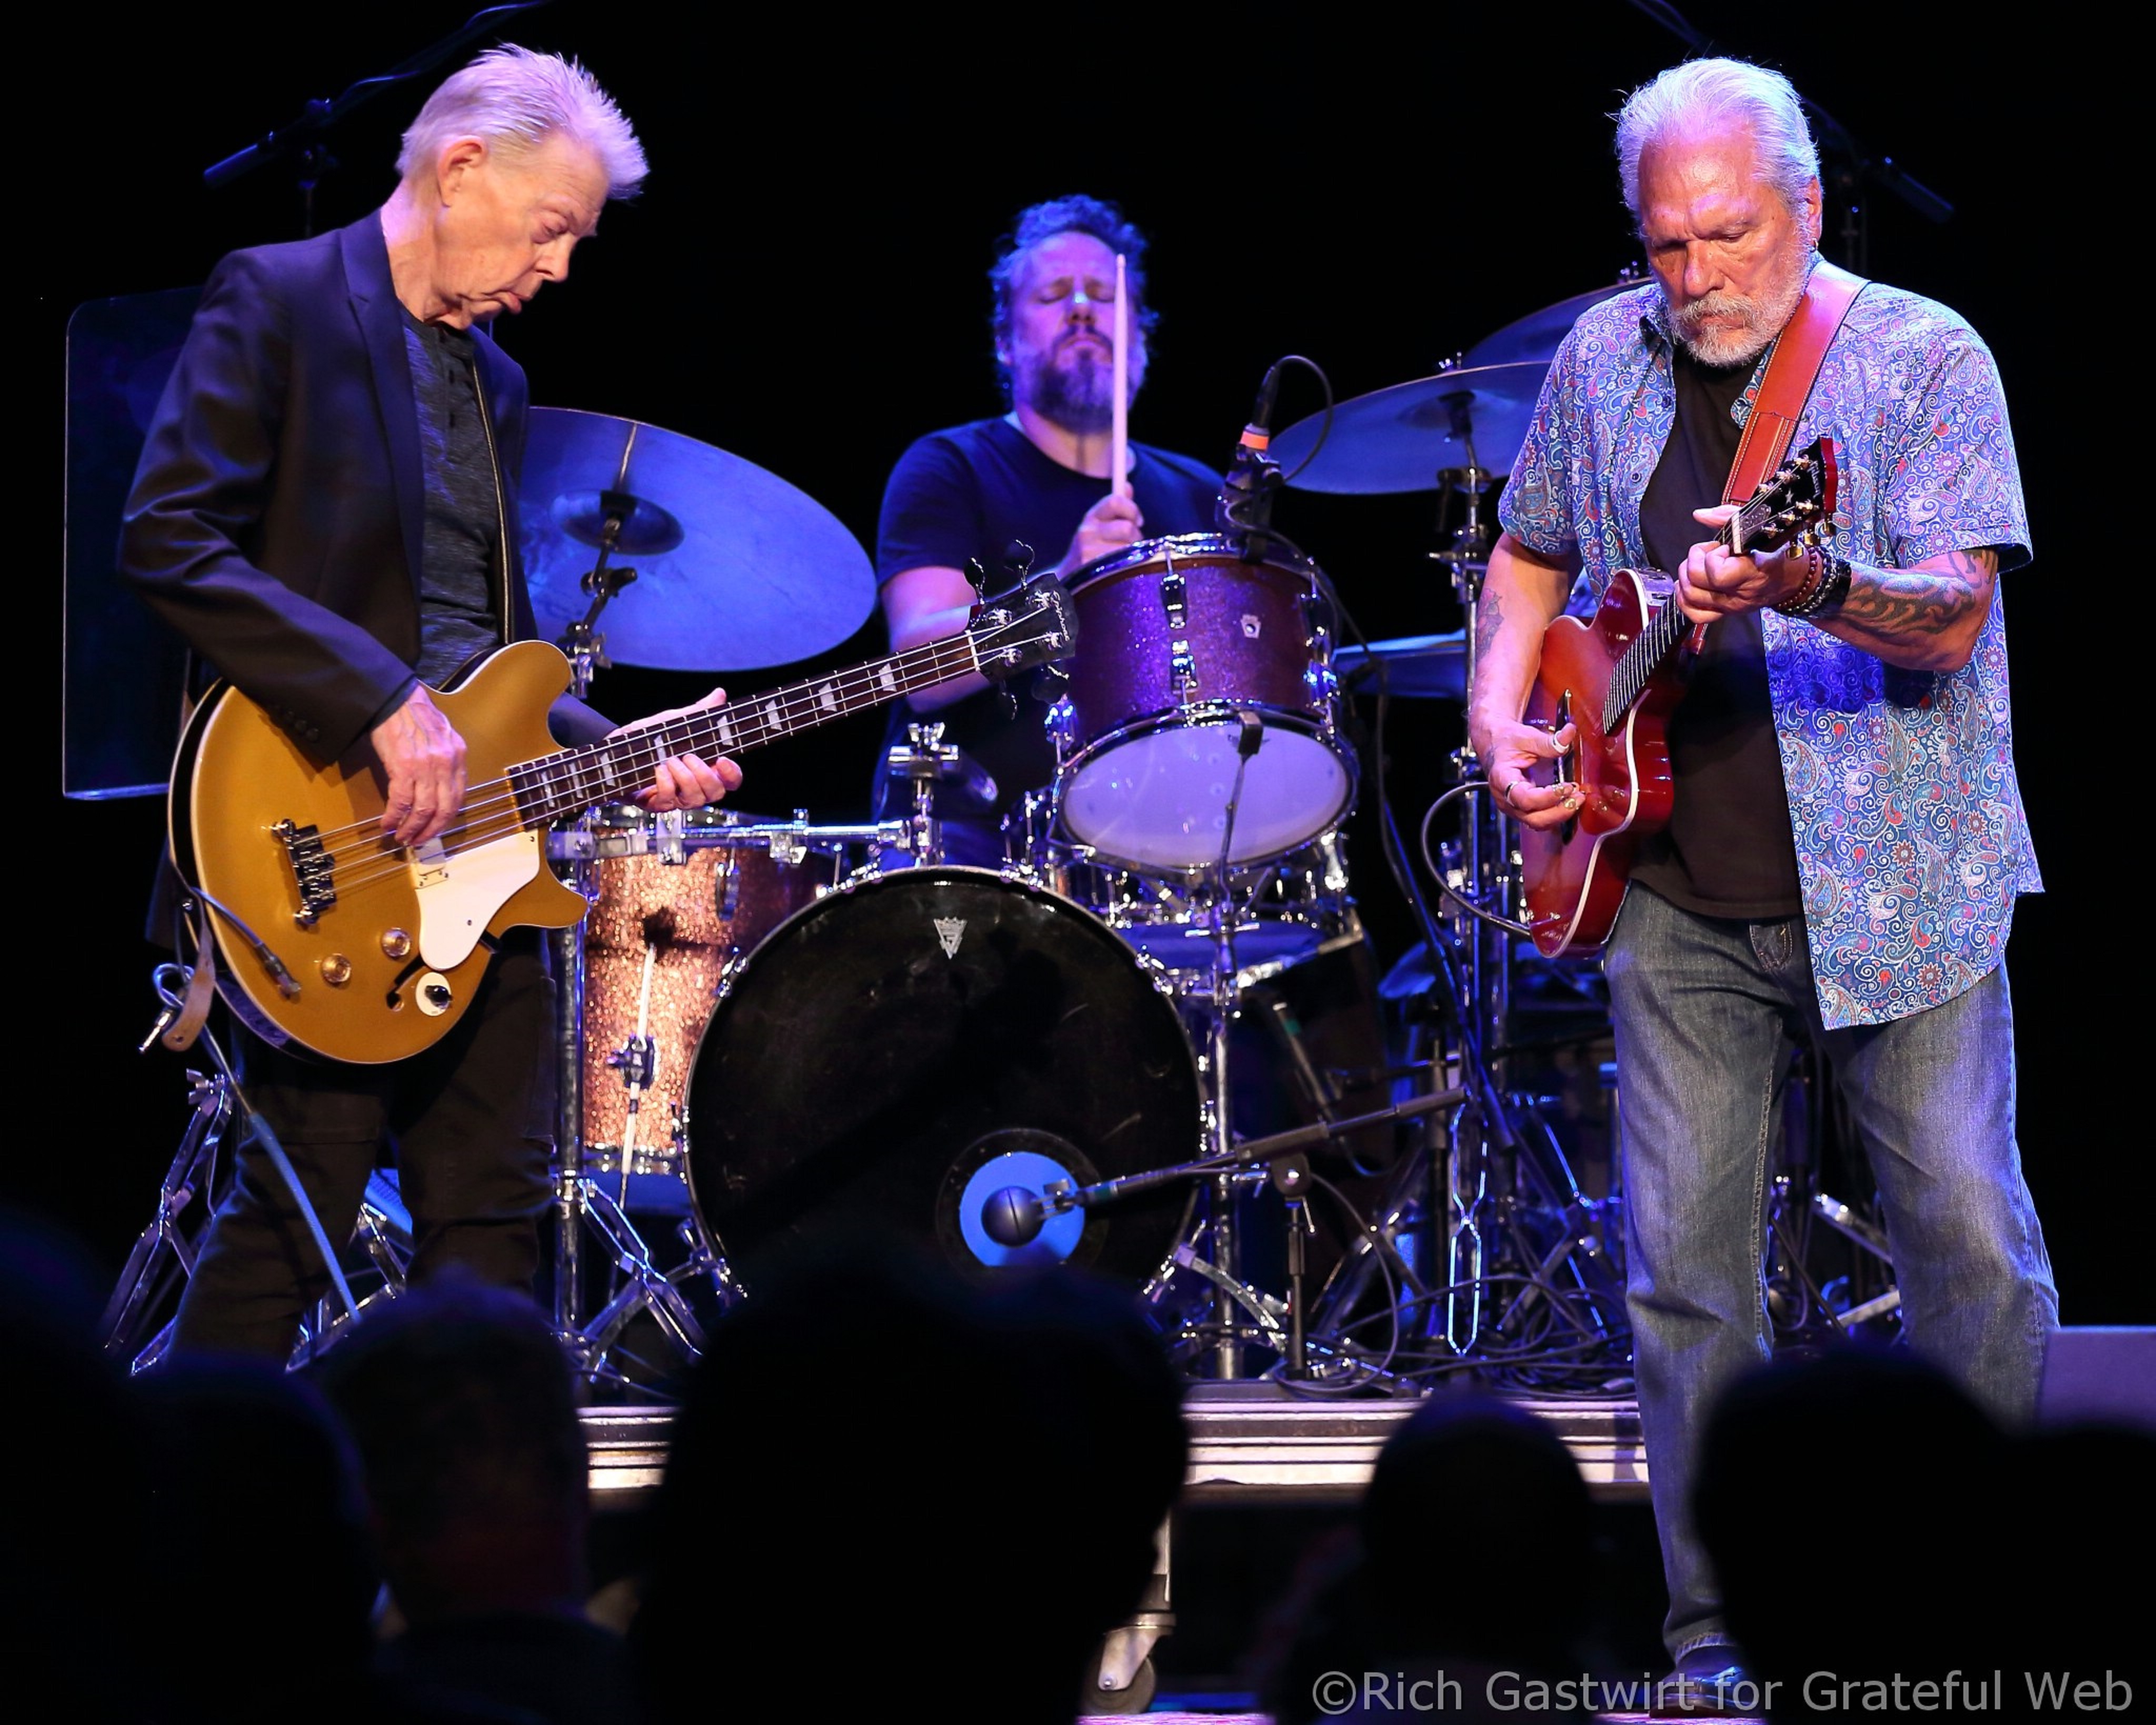 Fall, Winter and into Spring Hot Tuna's Touring includes Musical Friends